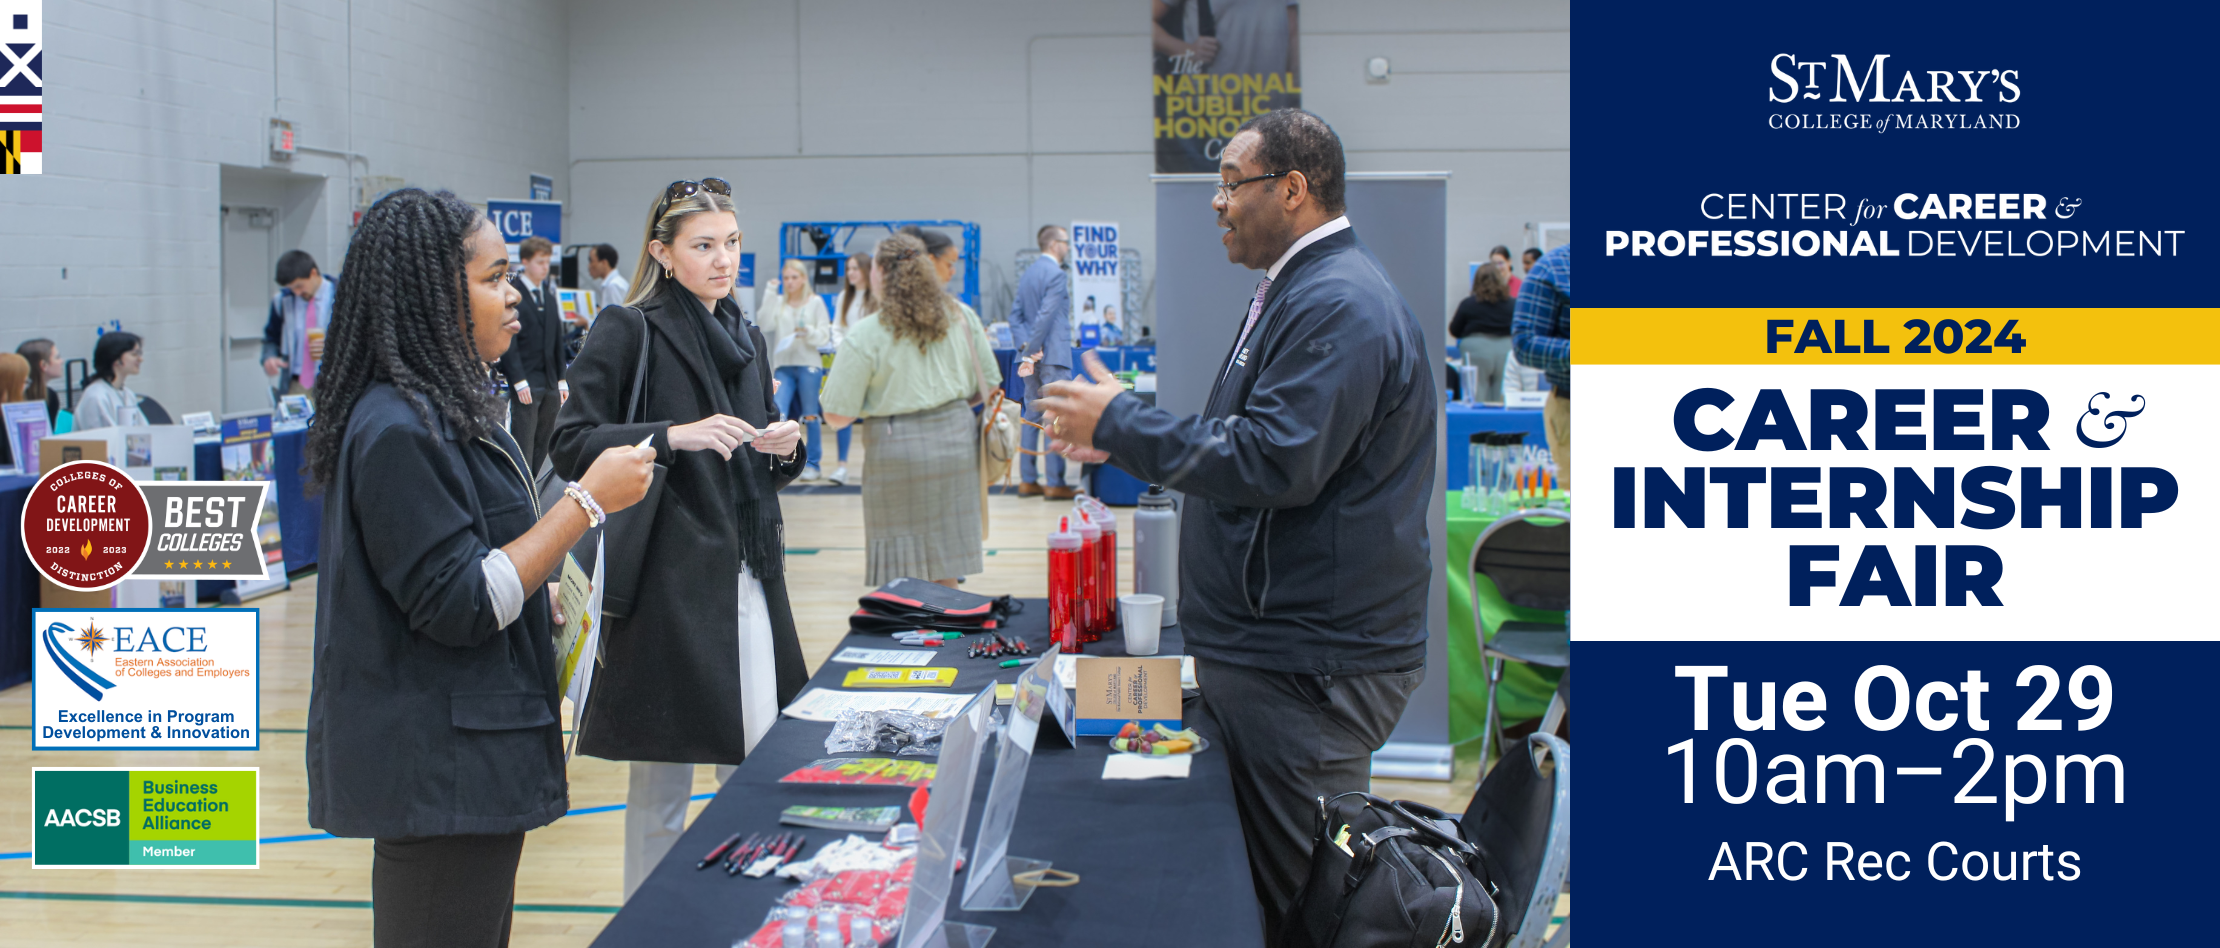 Image showing a photo of the Career & Internship Fair with the text: St. Mary’s College of Maryland Center for Career & Professional Development, Fall 2024 Career & Internship Fair, Tuesday, Oct 29, 10am–2pm, ARC Rec Courts.